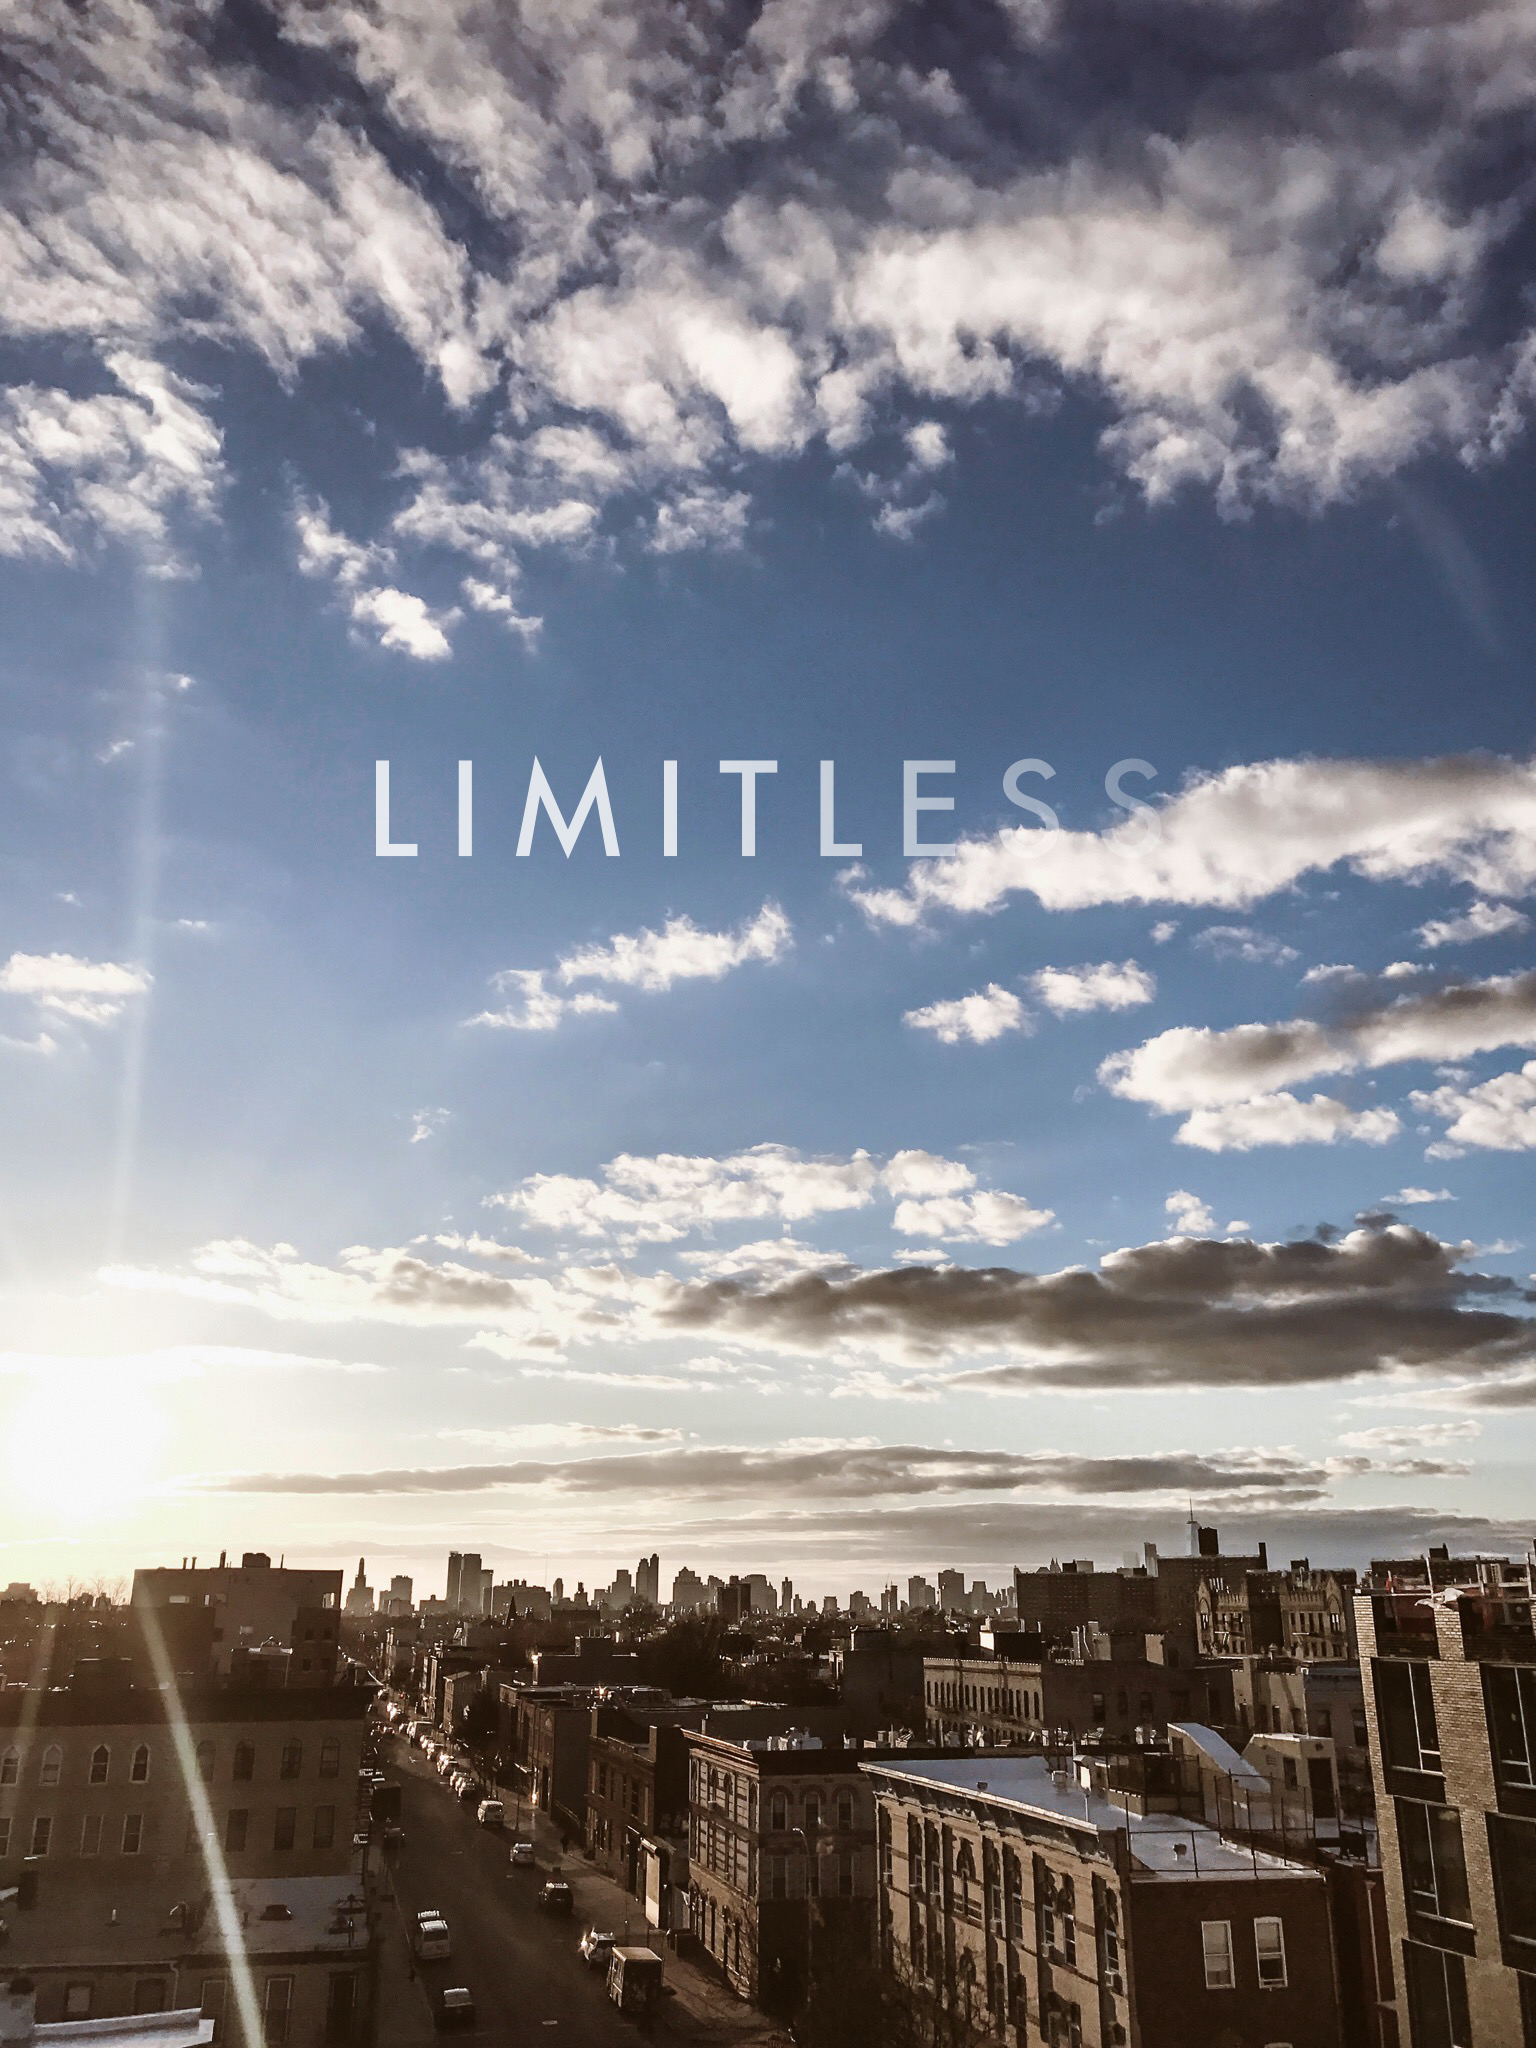 LIMITLESS.png